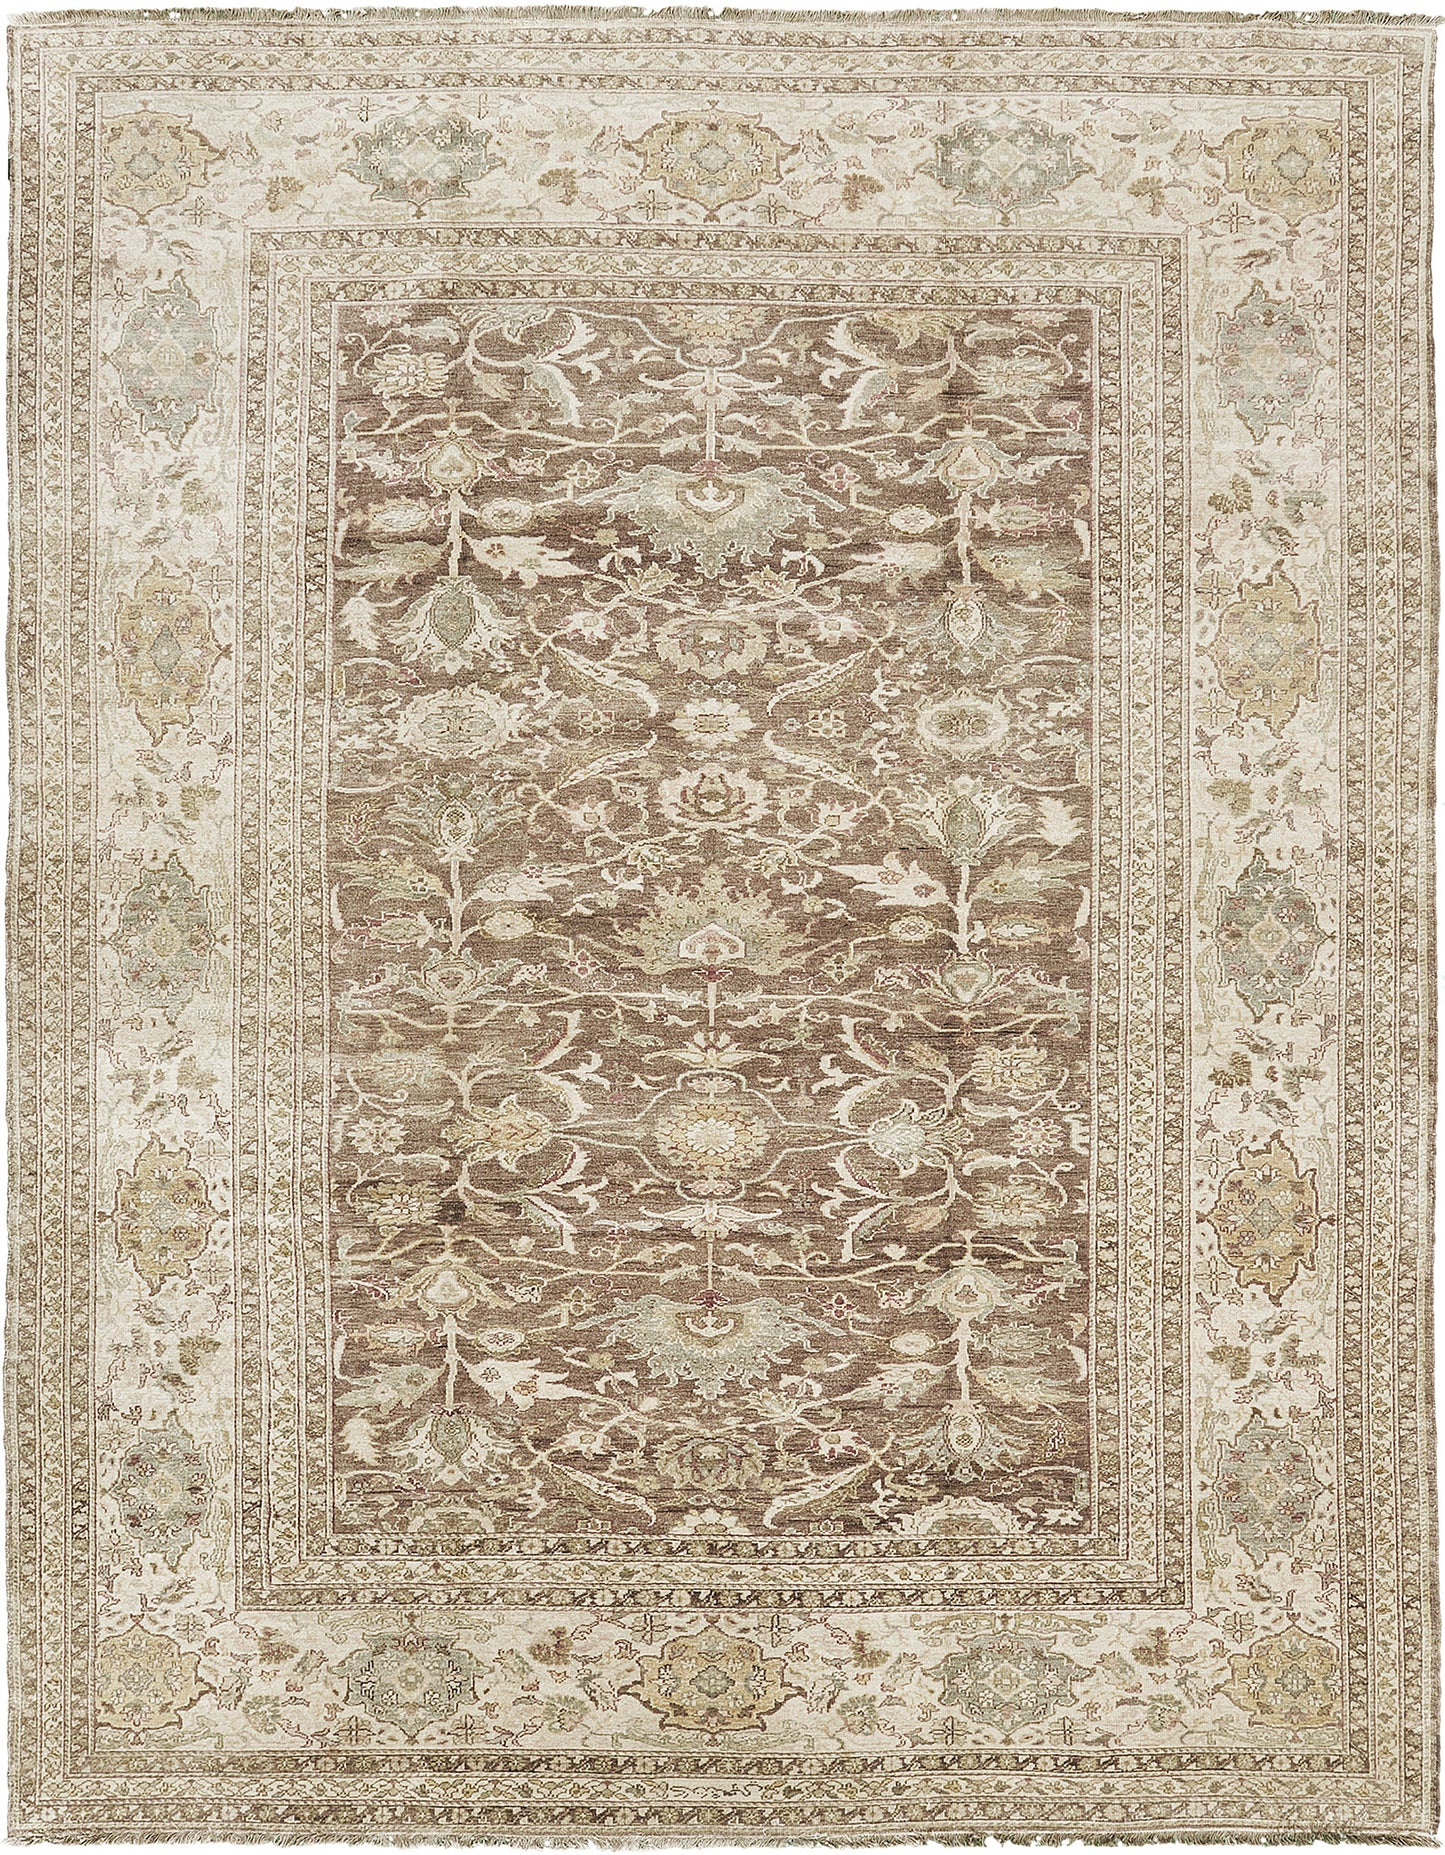 Turkish Sultanabad Revival Rug